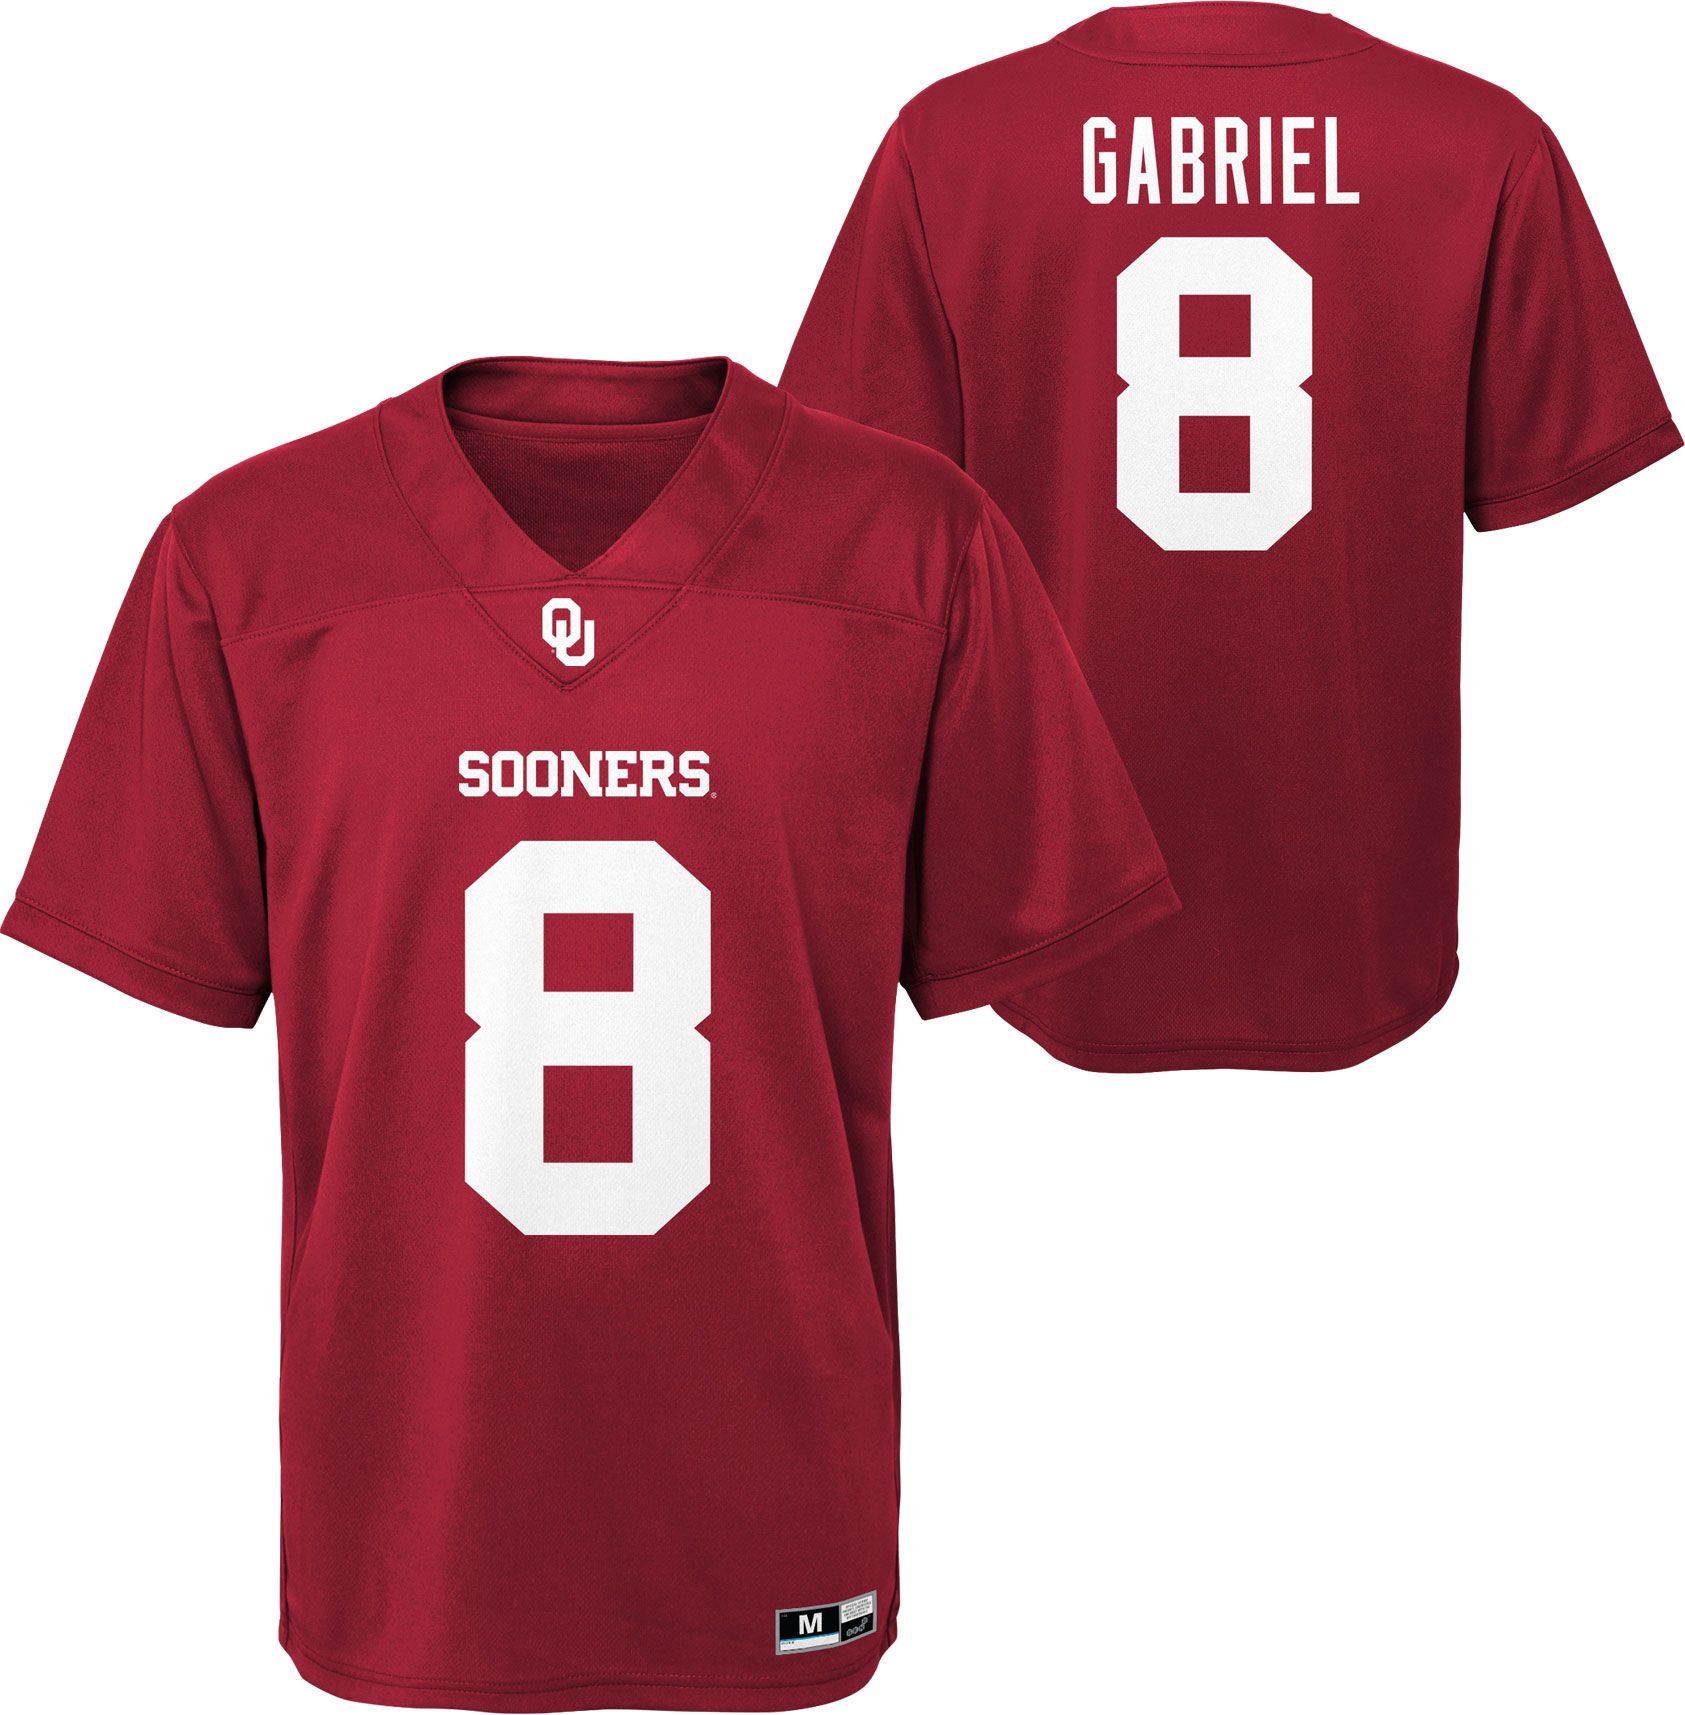 Sooners home soccer jersey